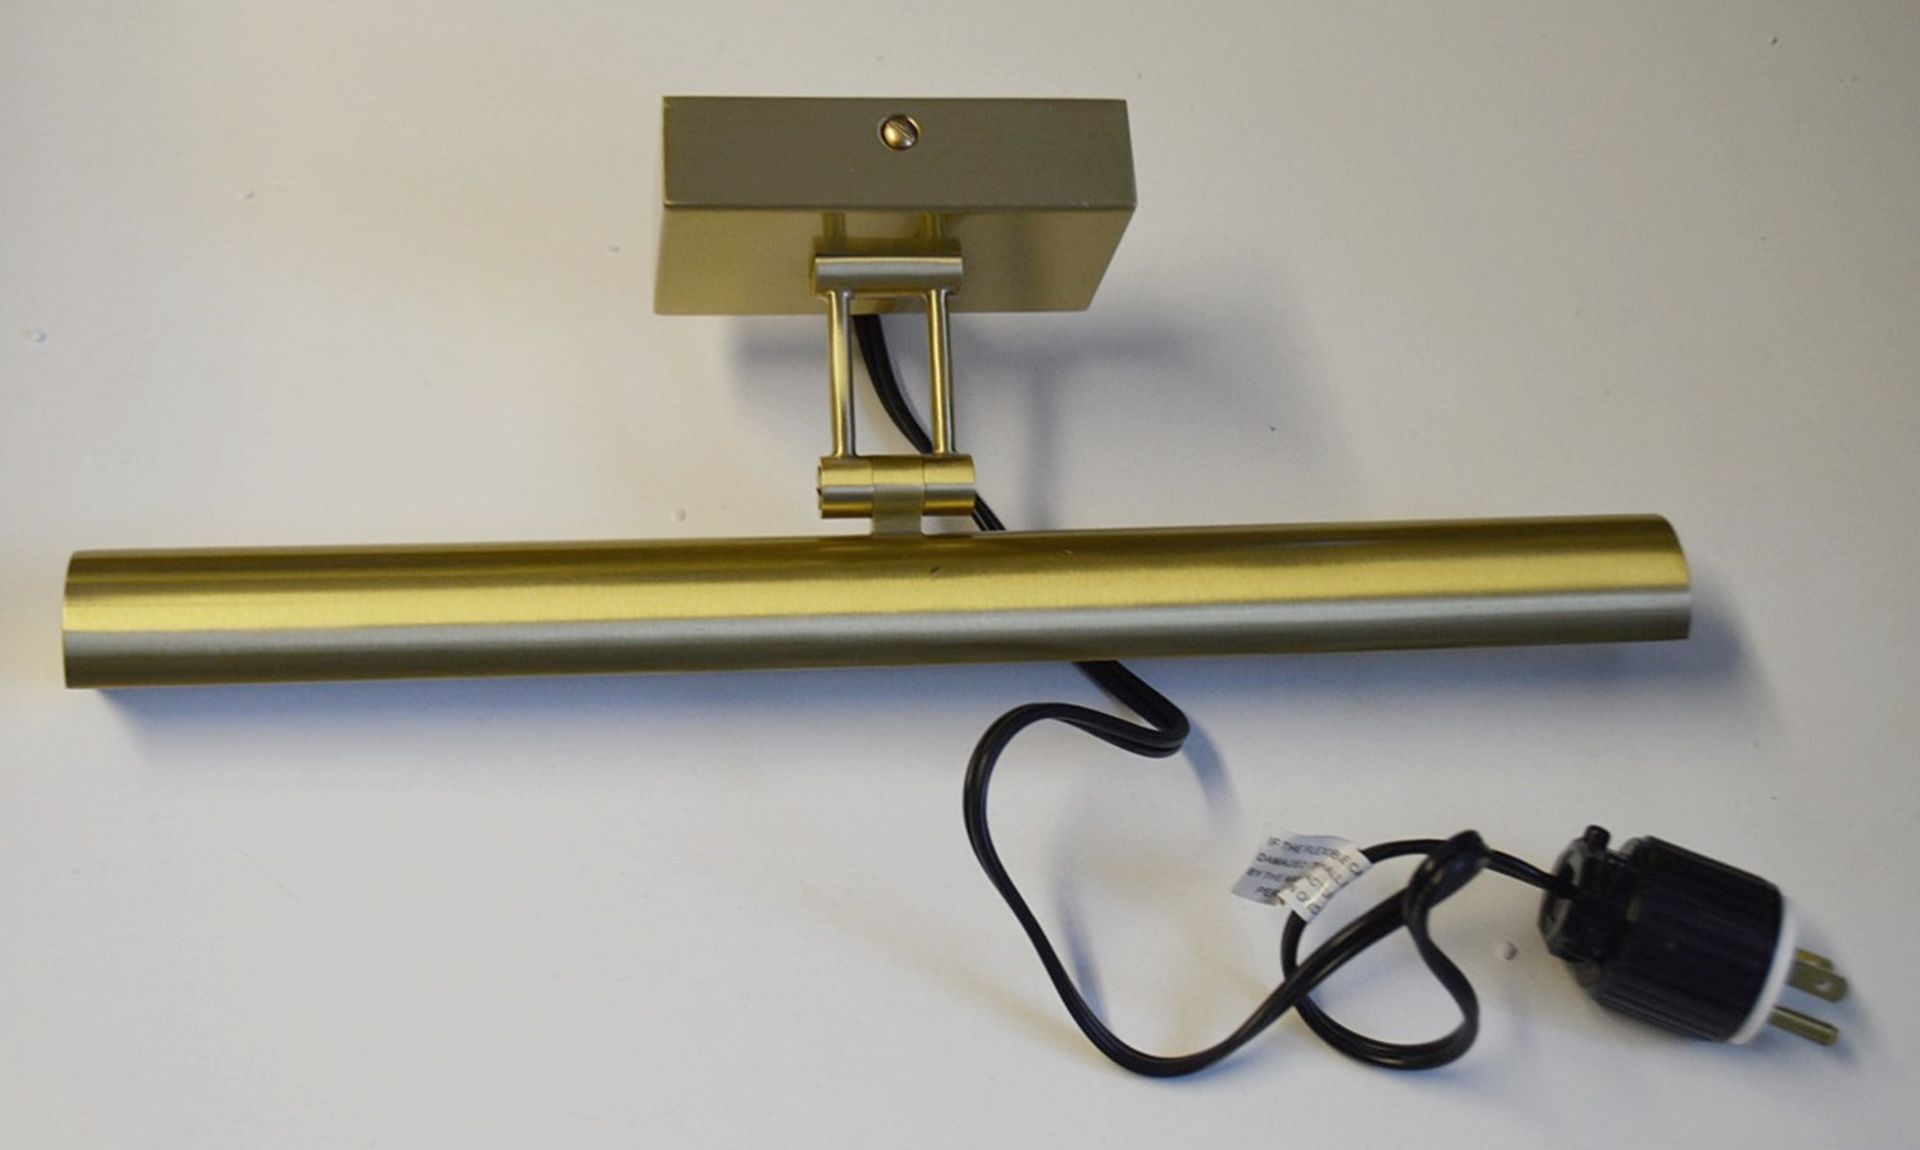 1 x CHELSOM Picture Light In A Brass Finish - Unused Boxed Stock - Dimensions: W38 x D13cm - Ref: - Image 6 of 6